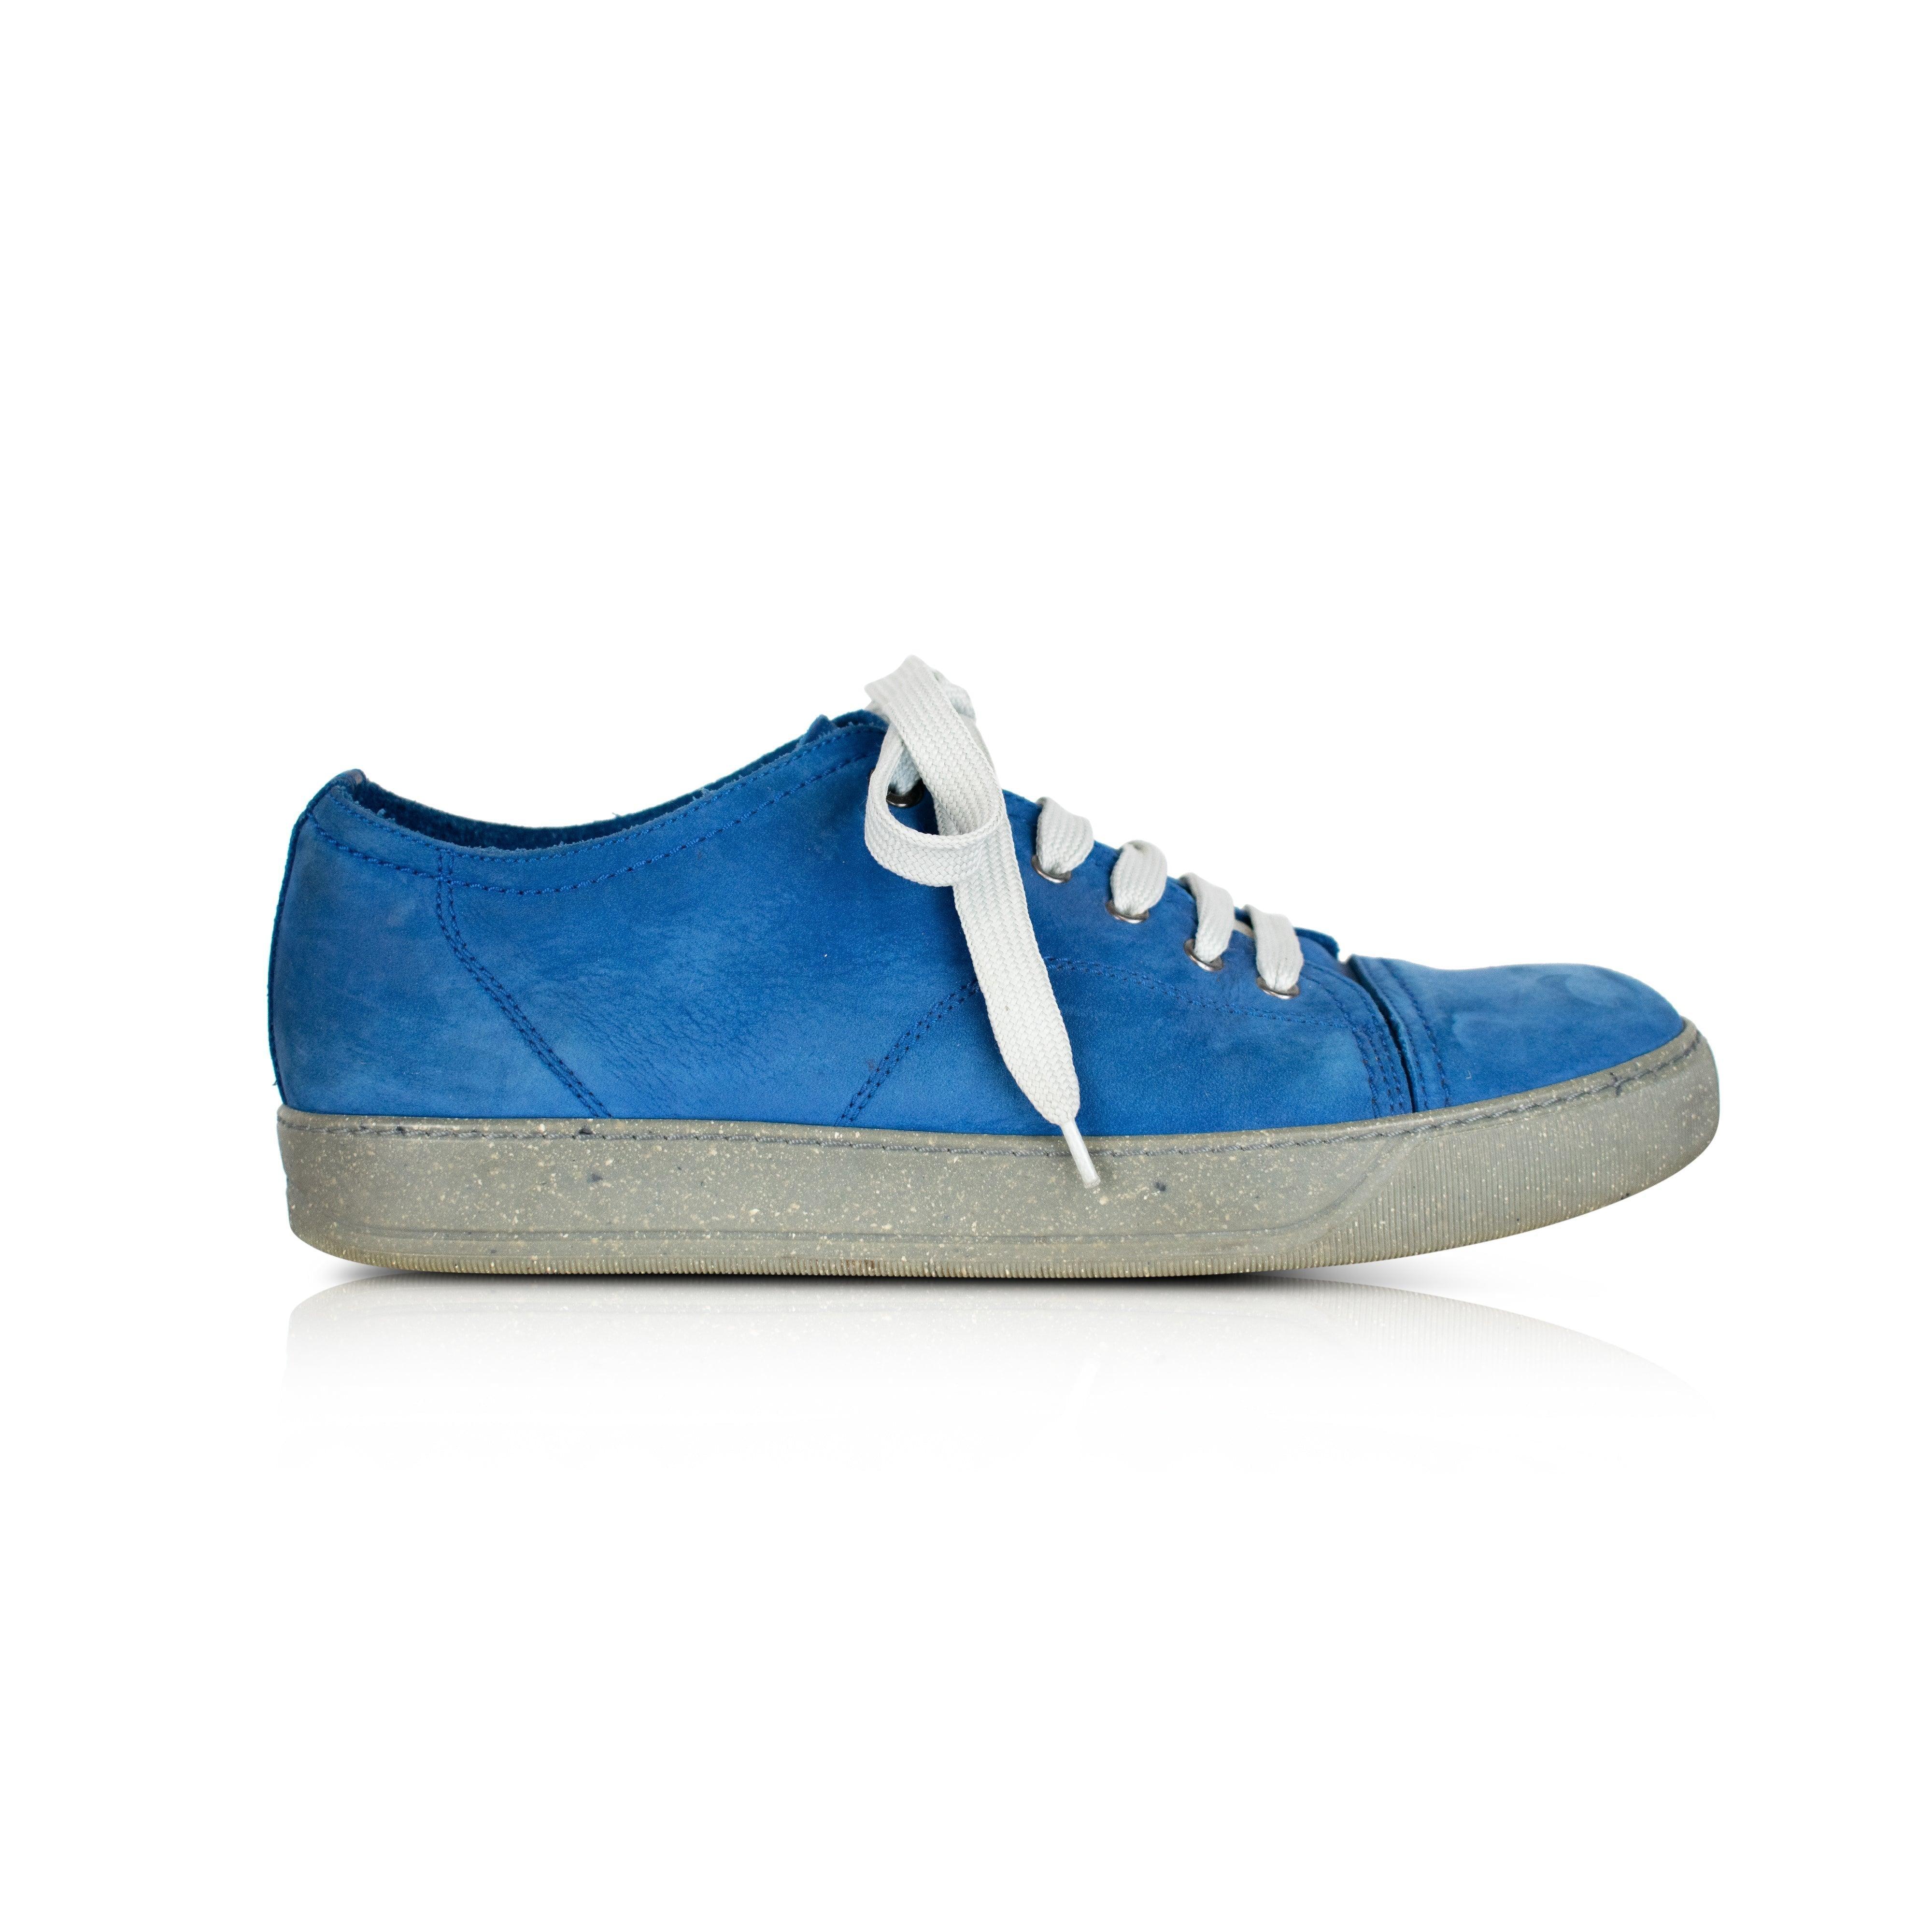 Lanvin Sneakers - Men's 9 - Fashionably Yours